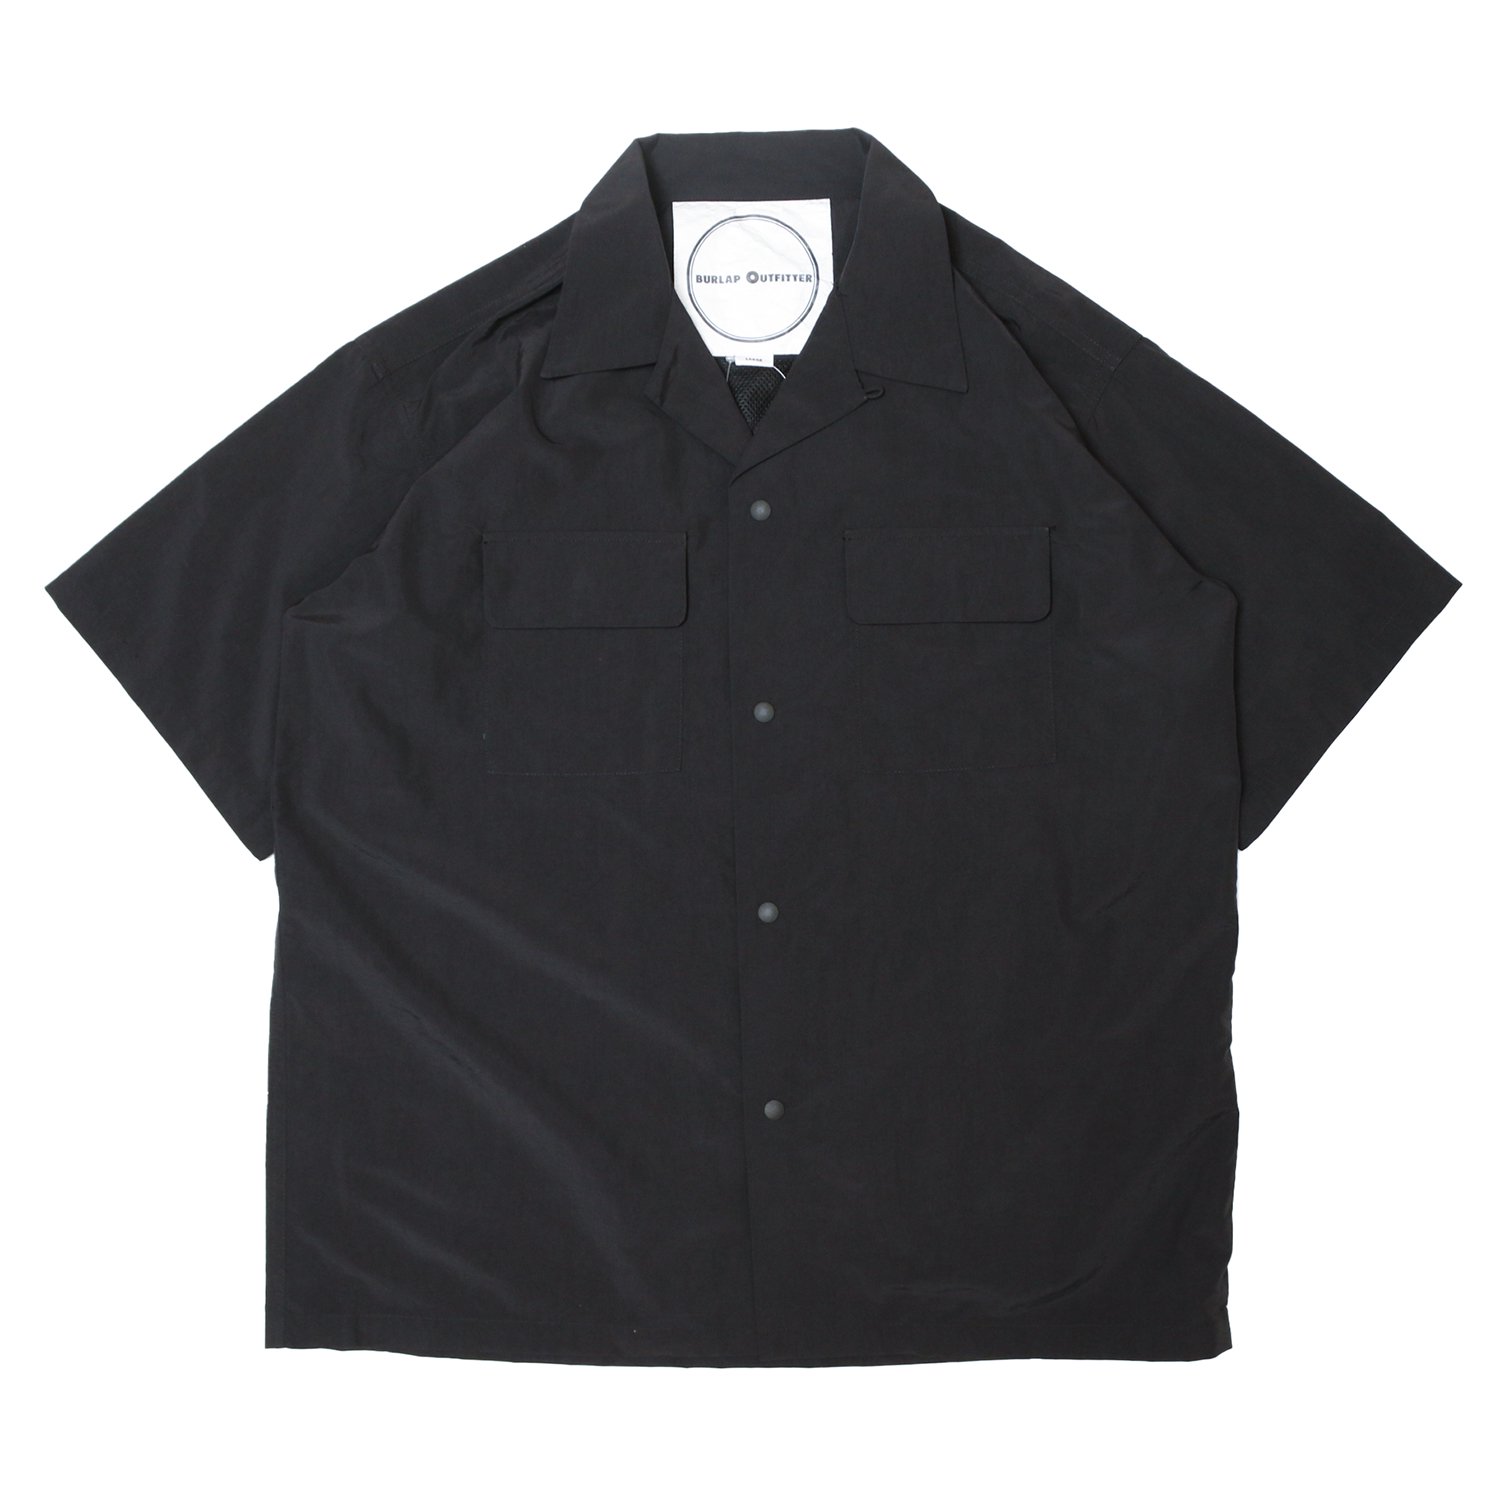 BURLAP OUTFITTER バーラップアウトフィッター / S/S CAMP SHIRT SOLID